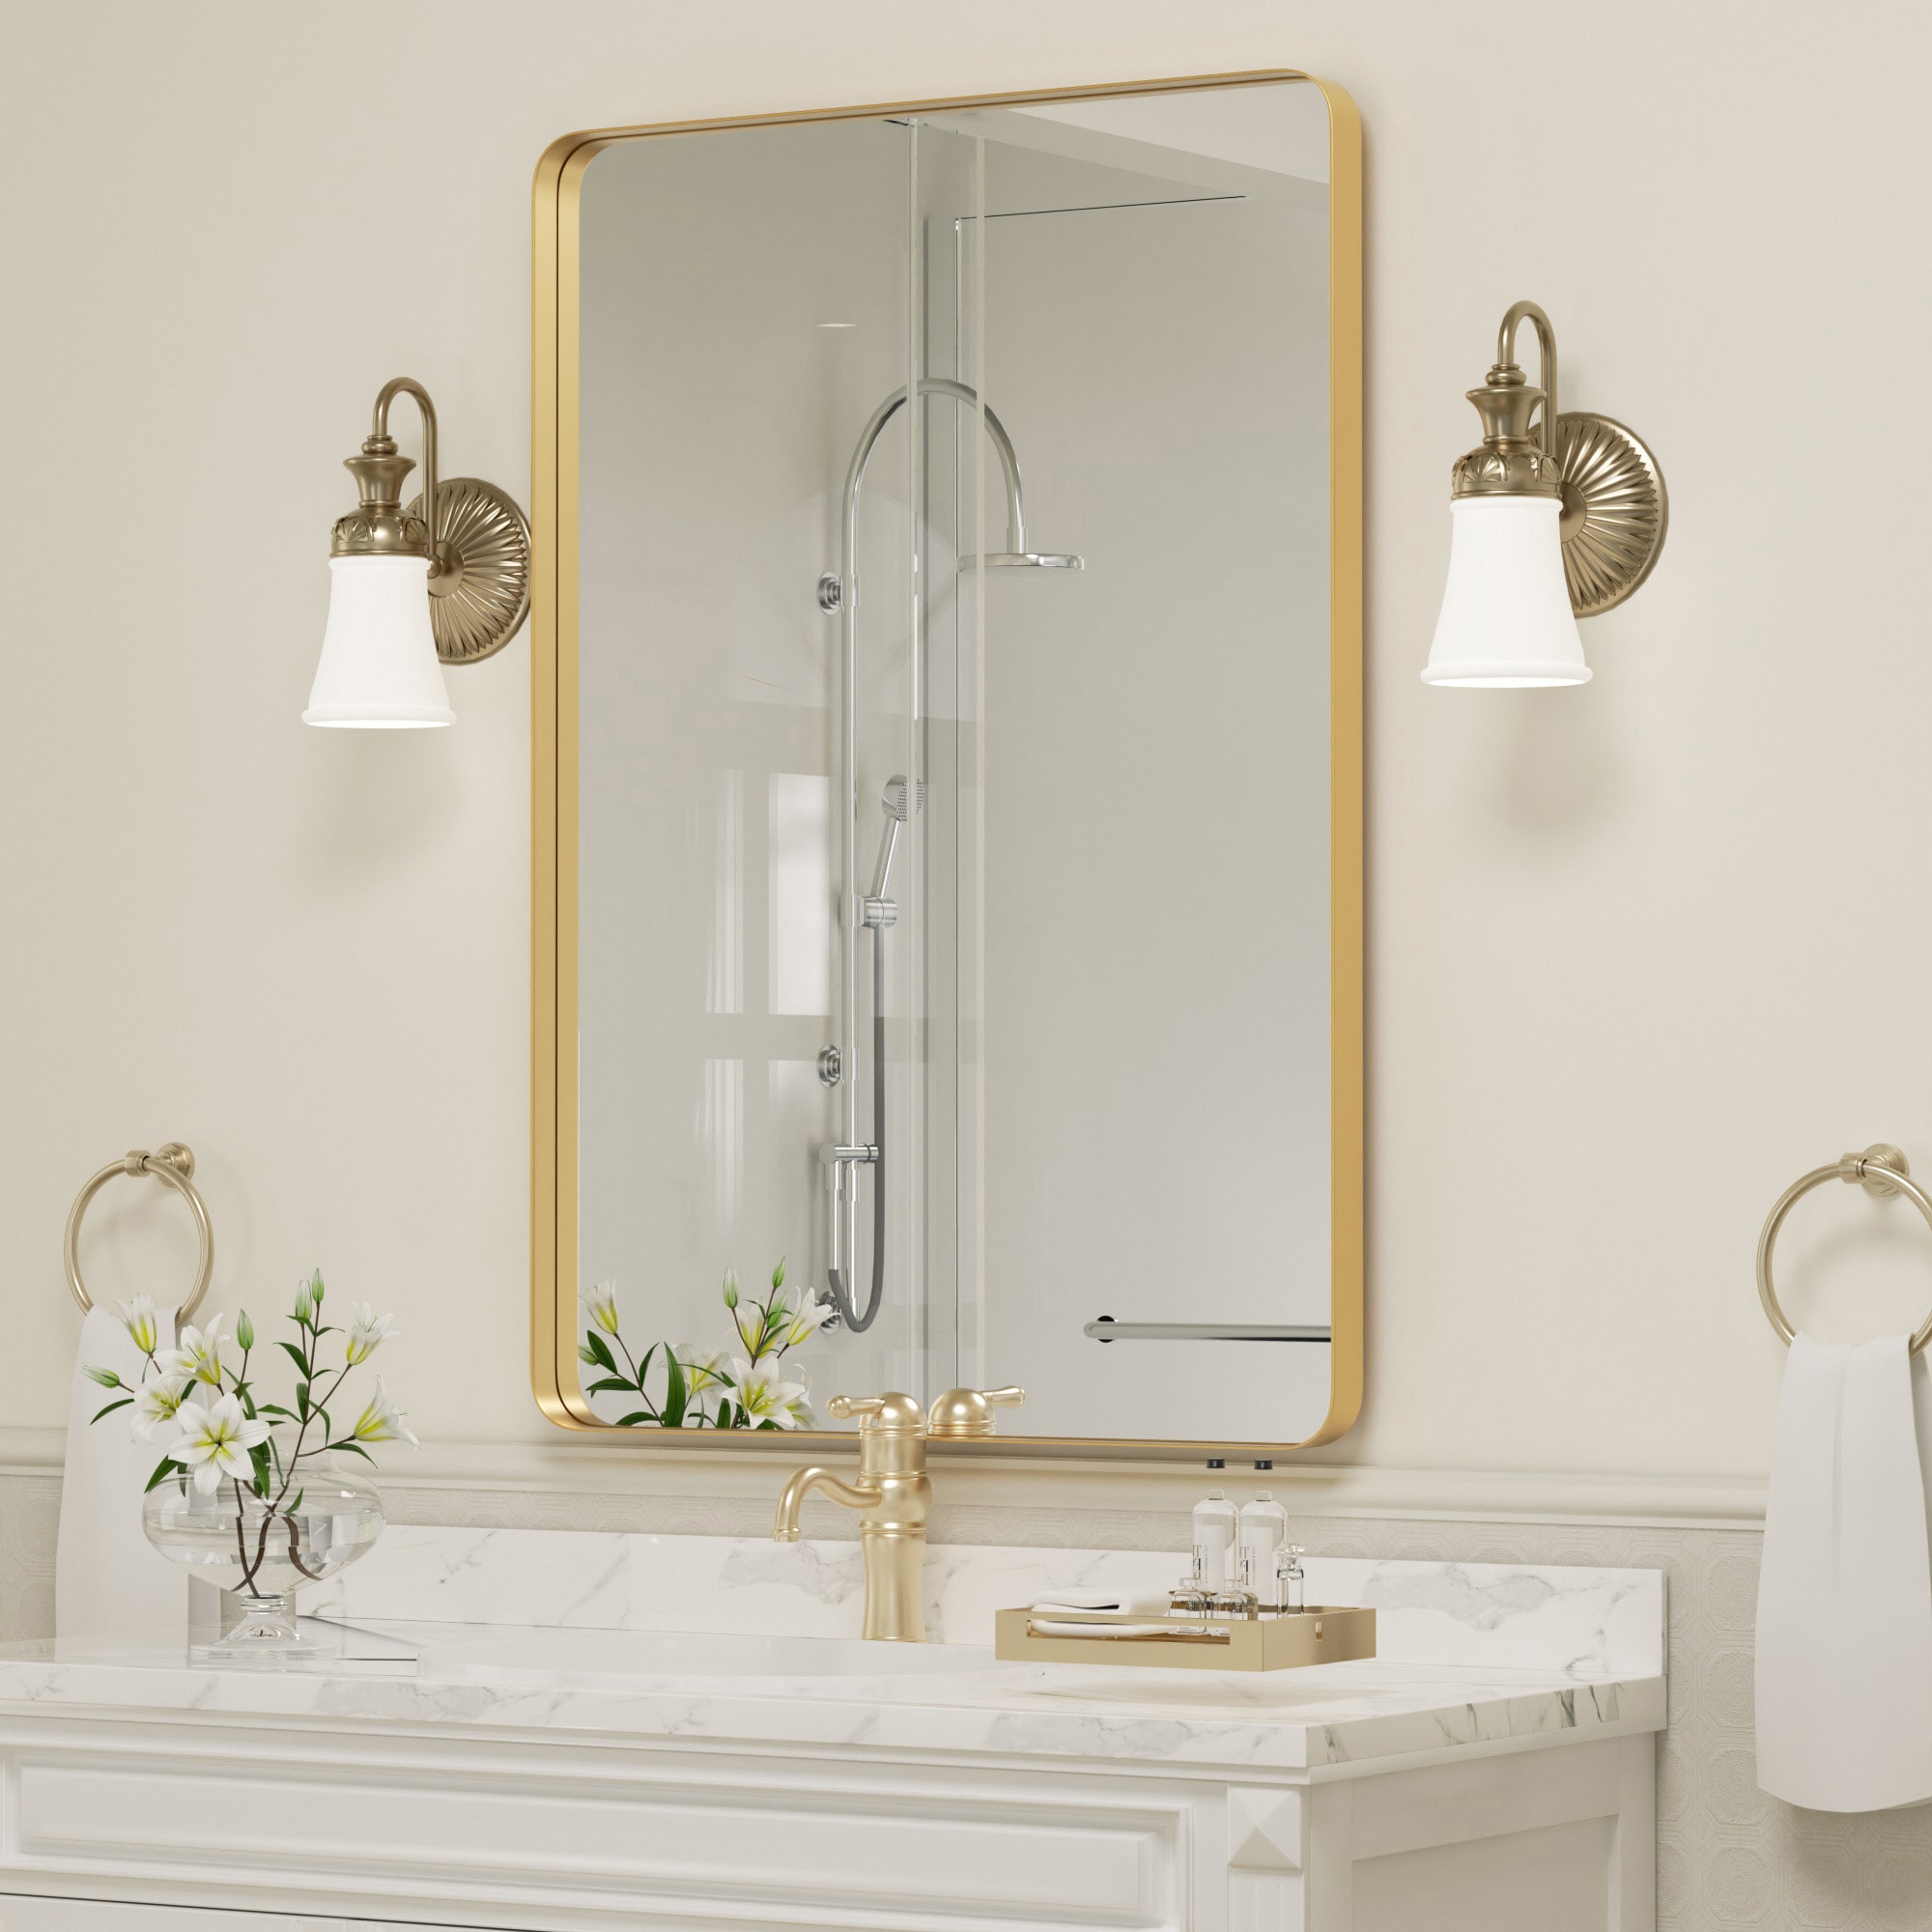 BC Gold Wall-mounted Shower Caddy